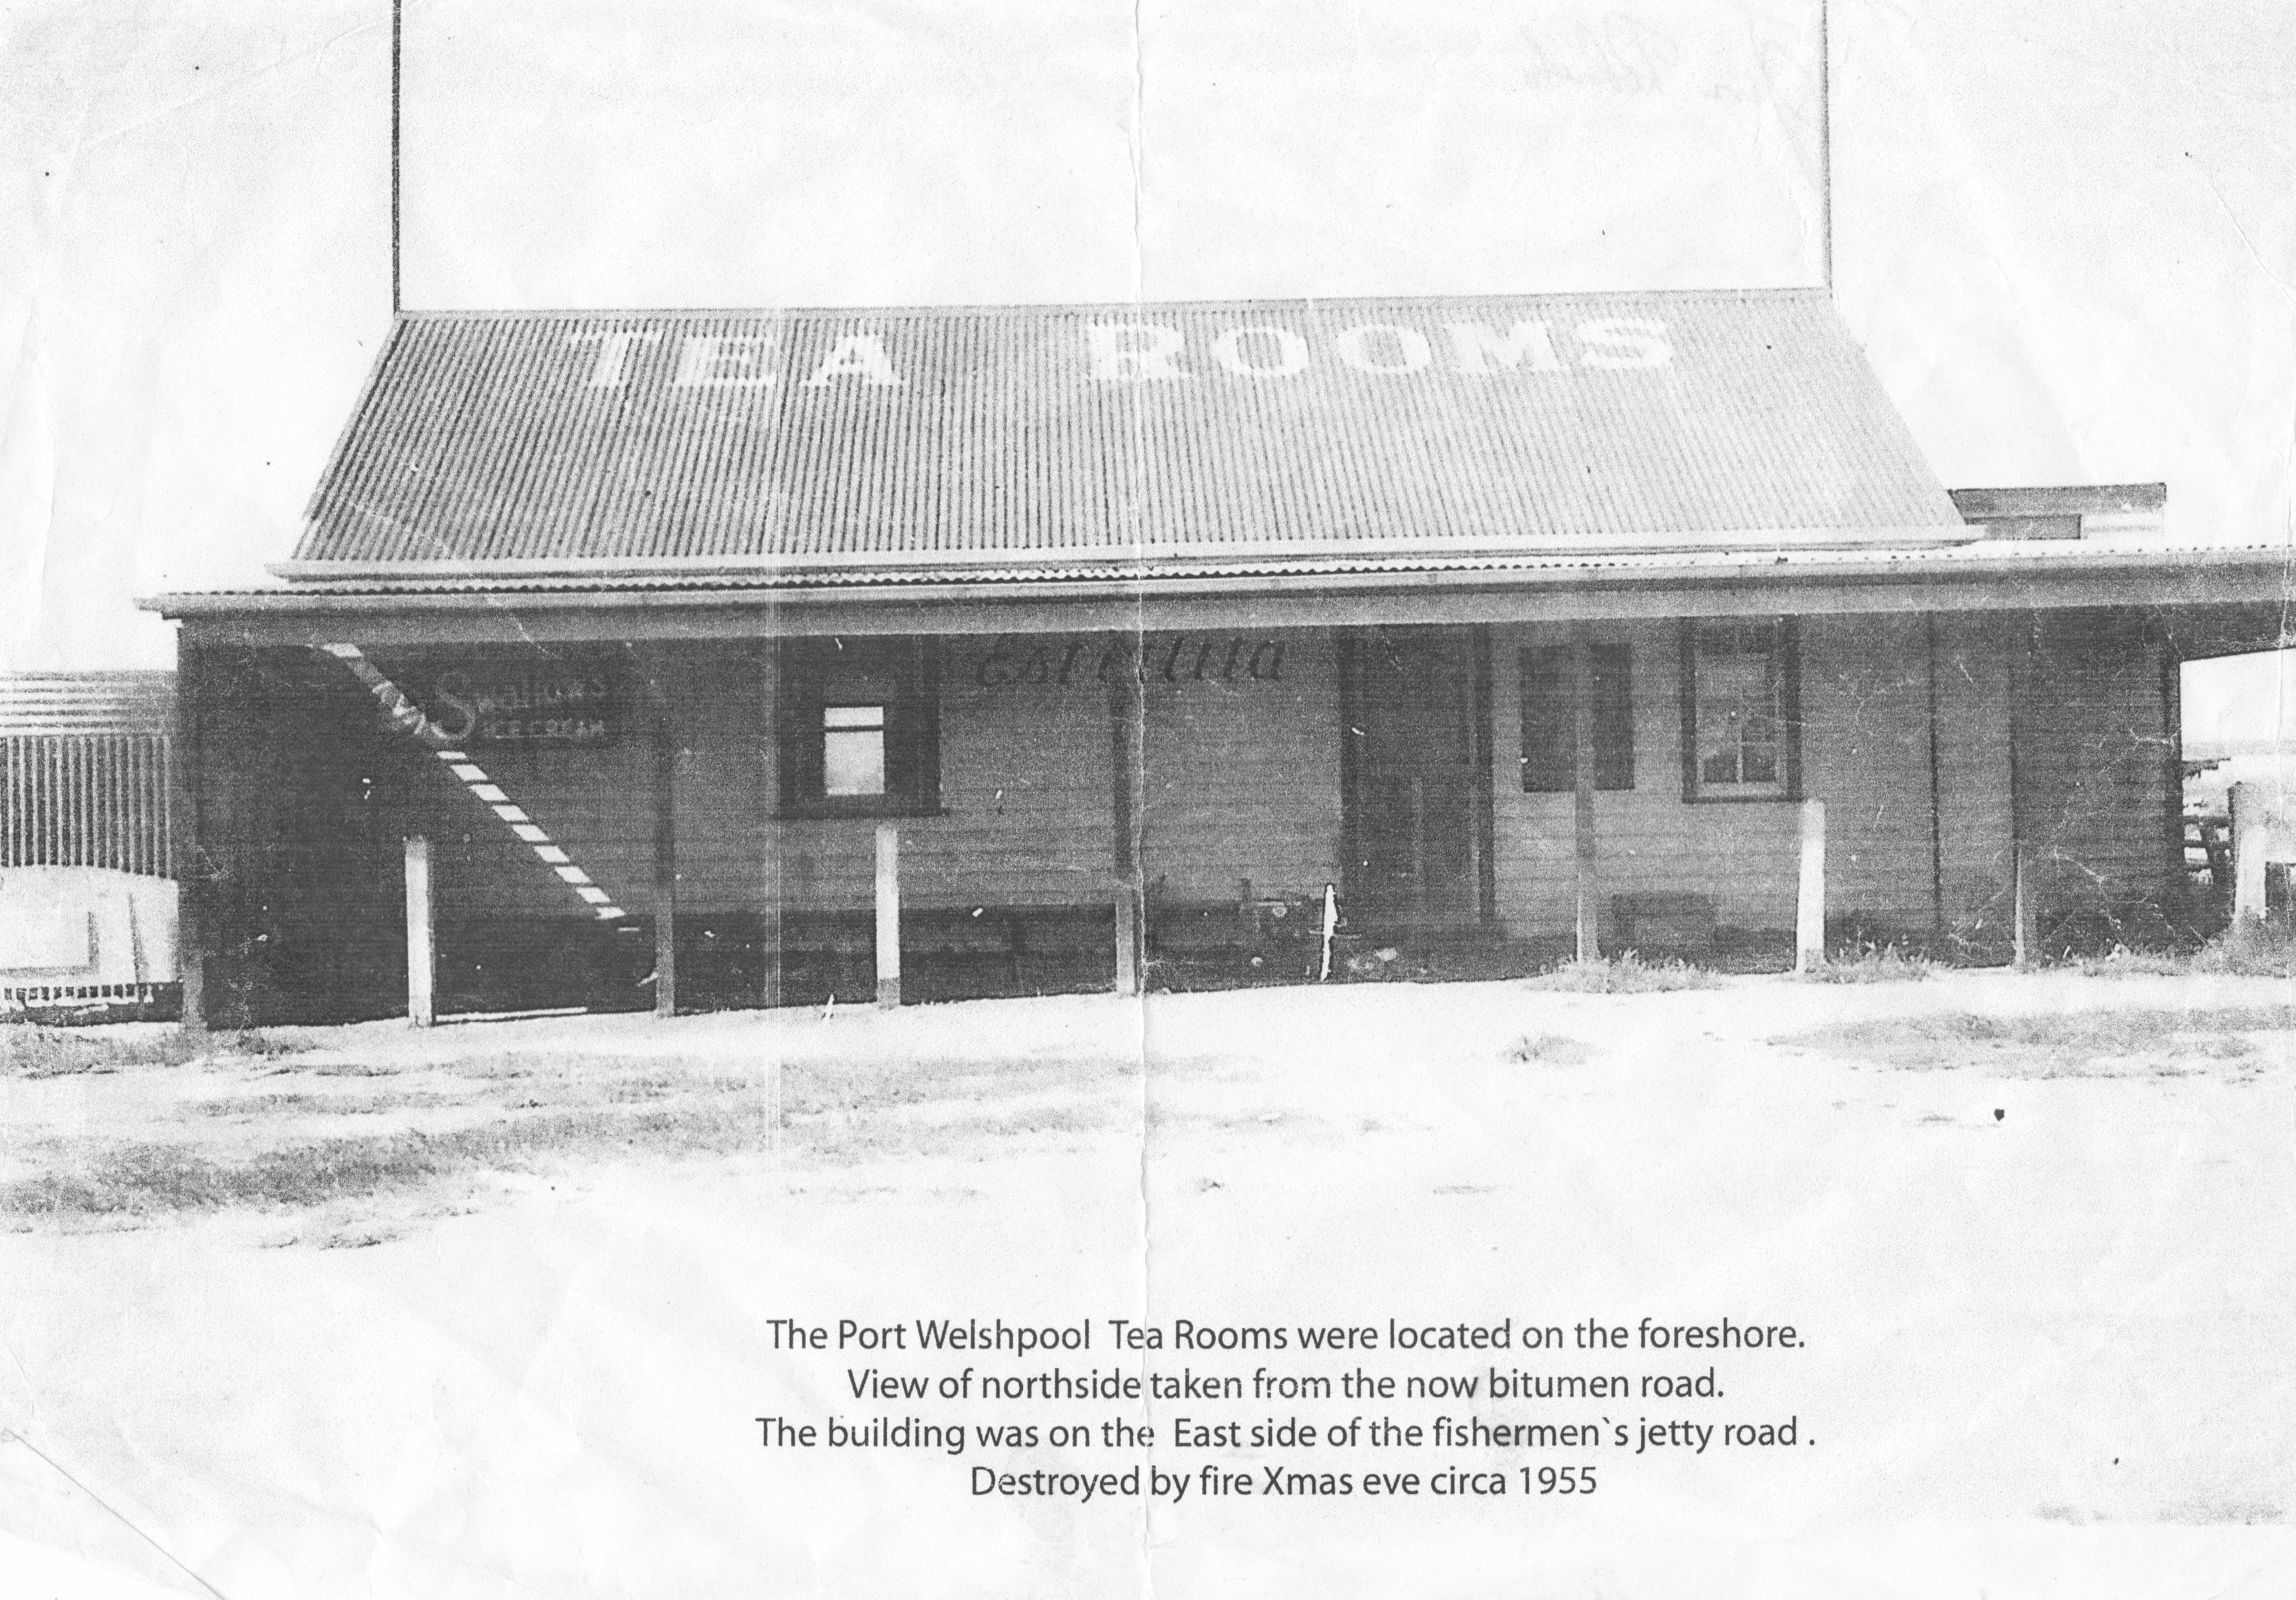 The Port Welshpool Tea Rooms were located on the foreshore.  View of northside taken from the now bitumen road.  The building was on the eastside of the fishermen's jetty road.  Destroyed by fire Xmas eve circa 1955